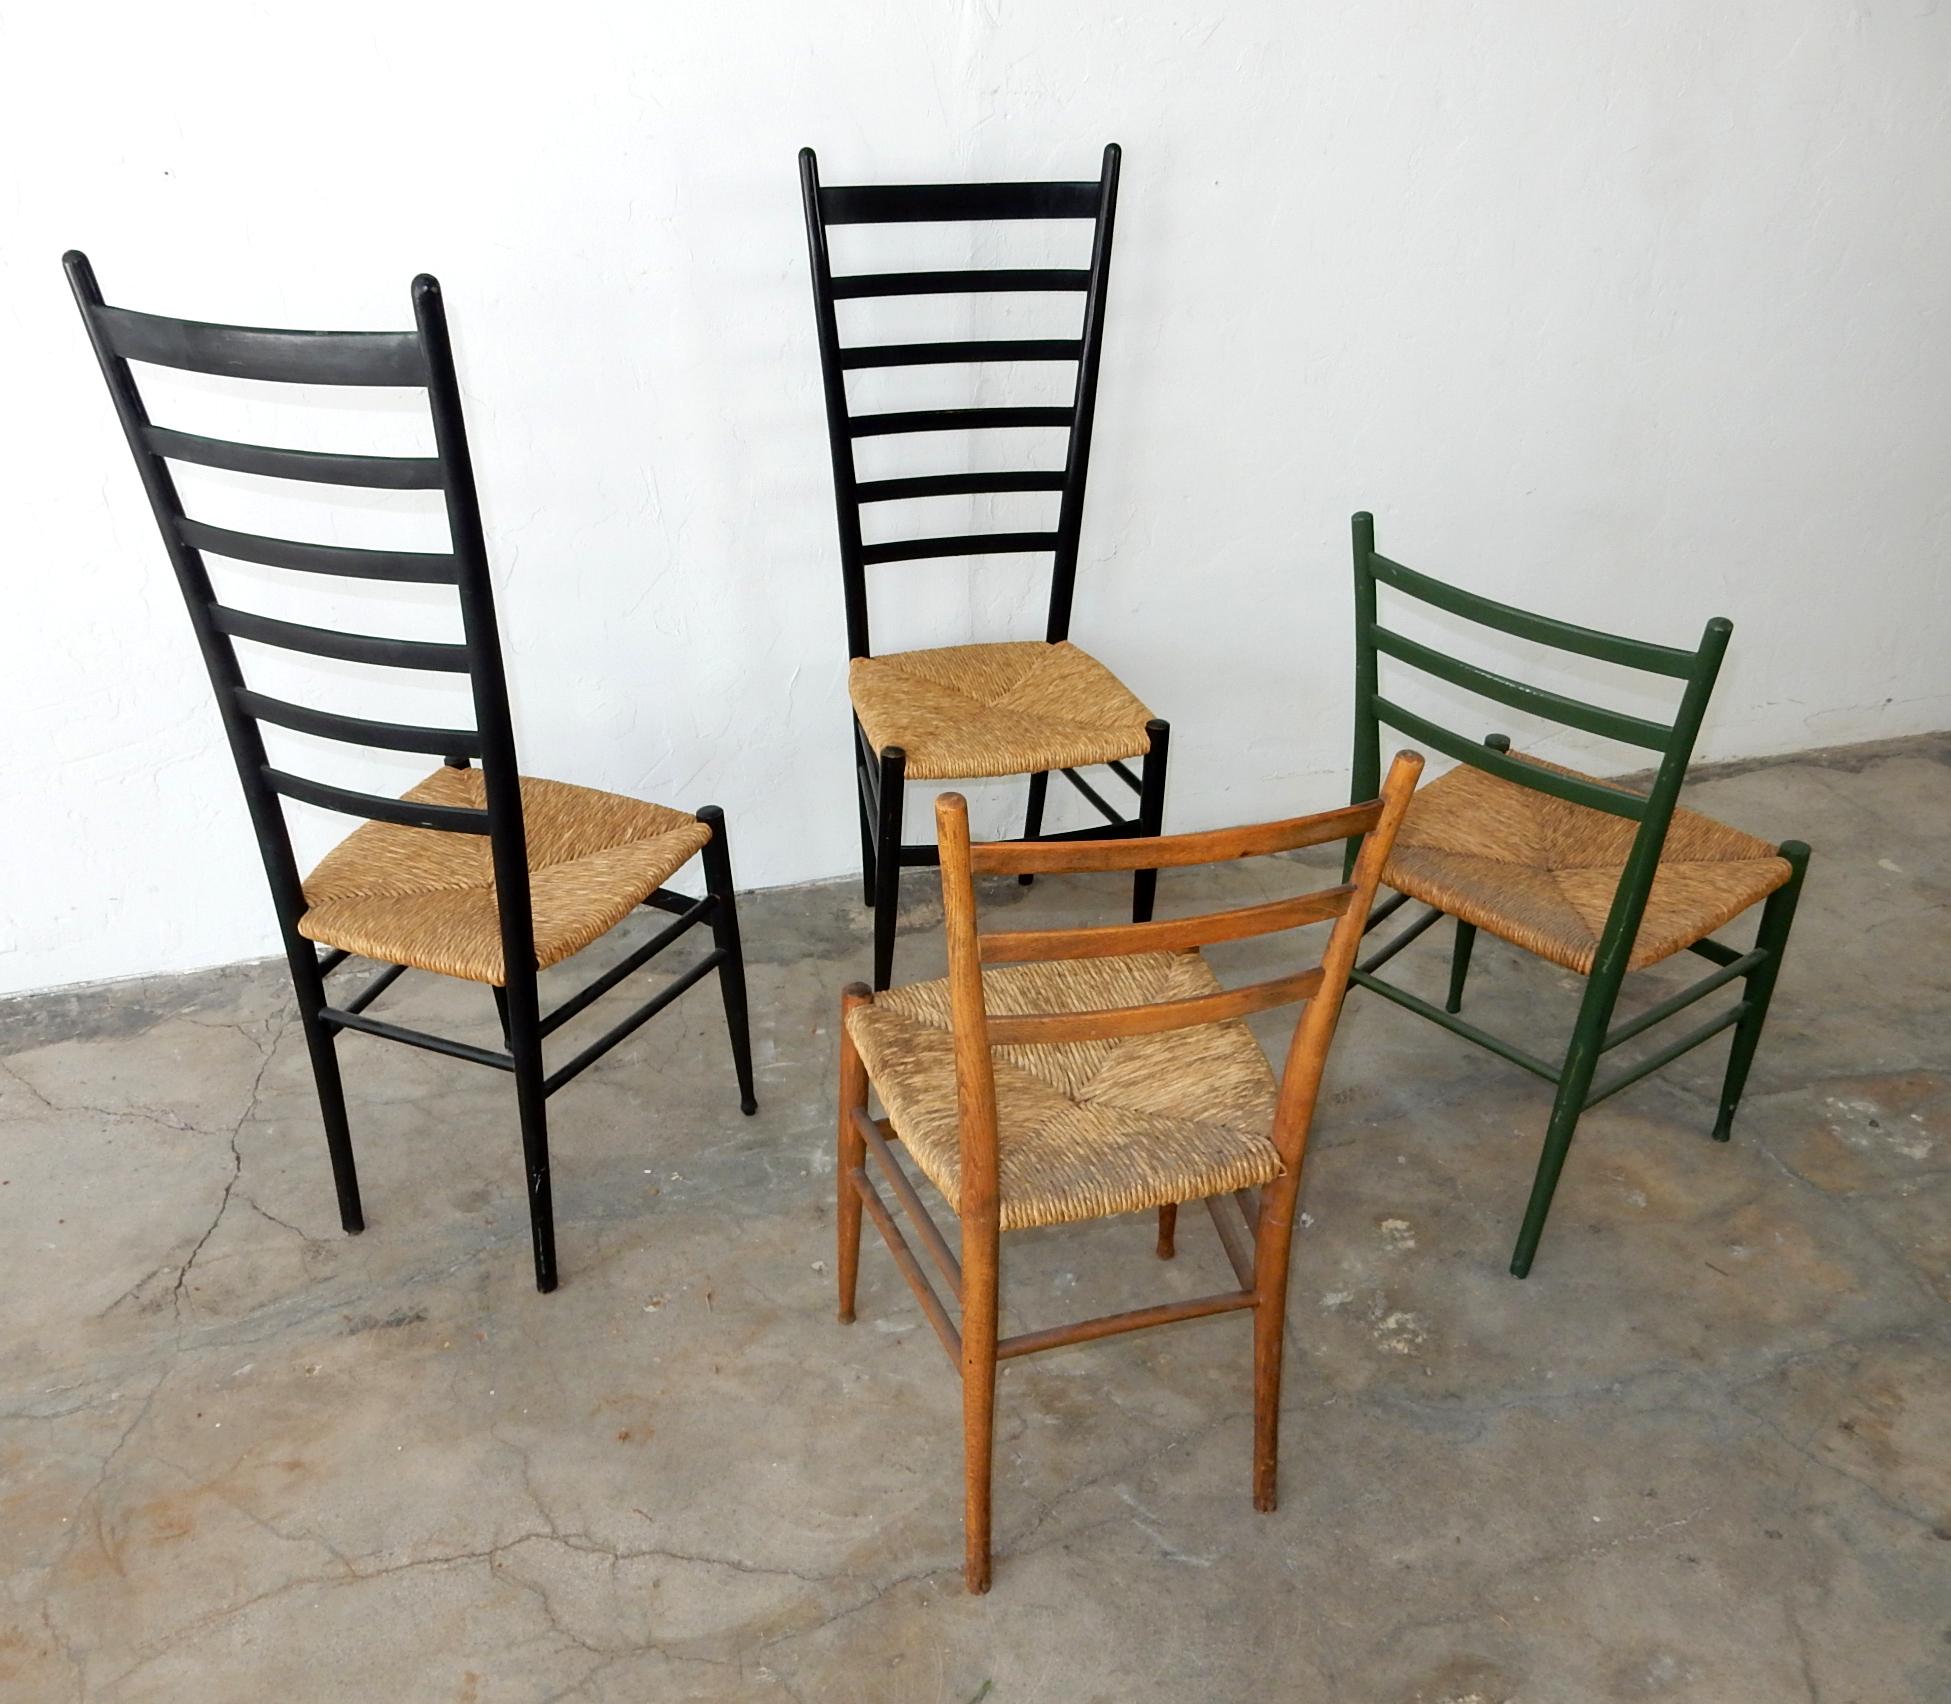 20th Century Vintage Italian Ladder Back Chairs with Rush Seating